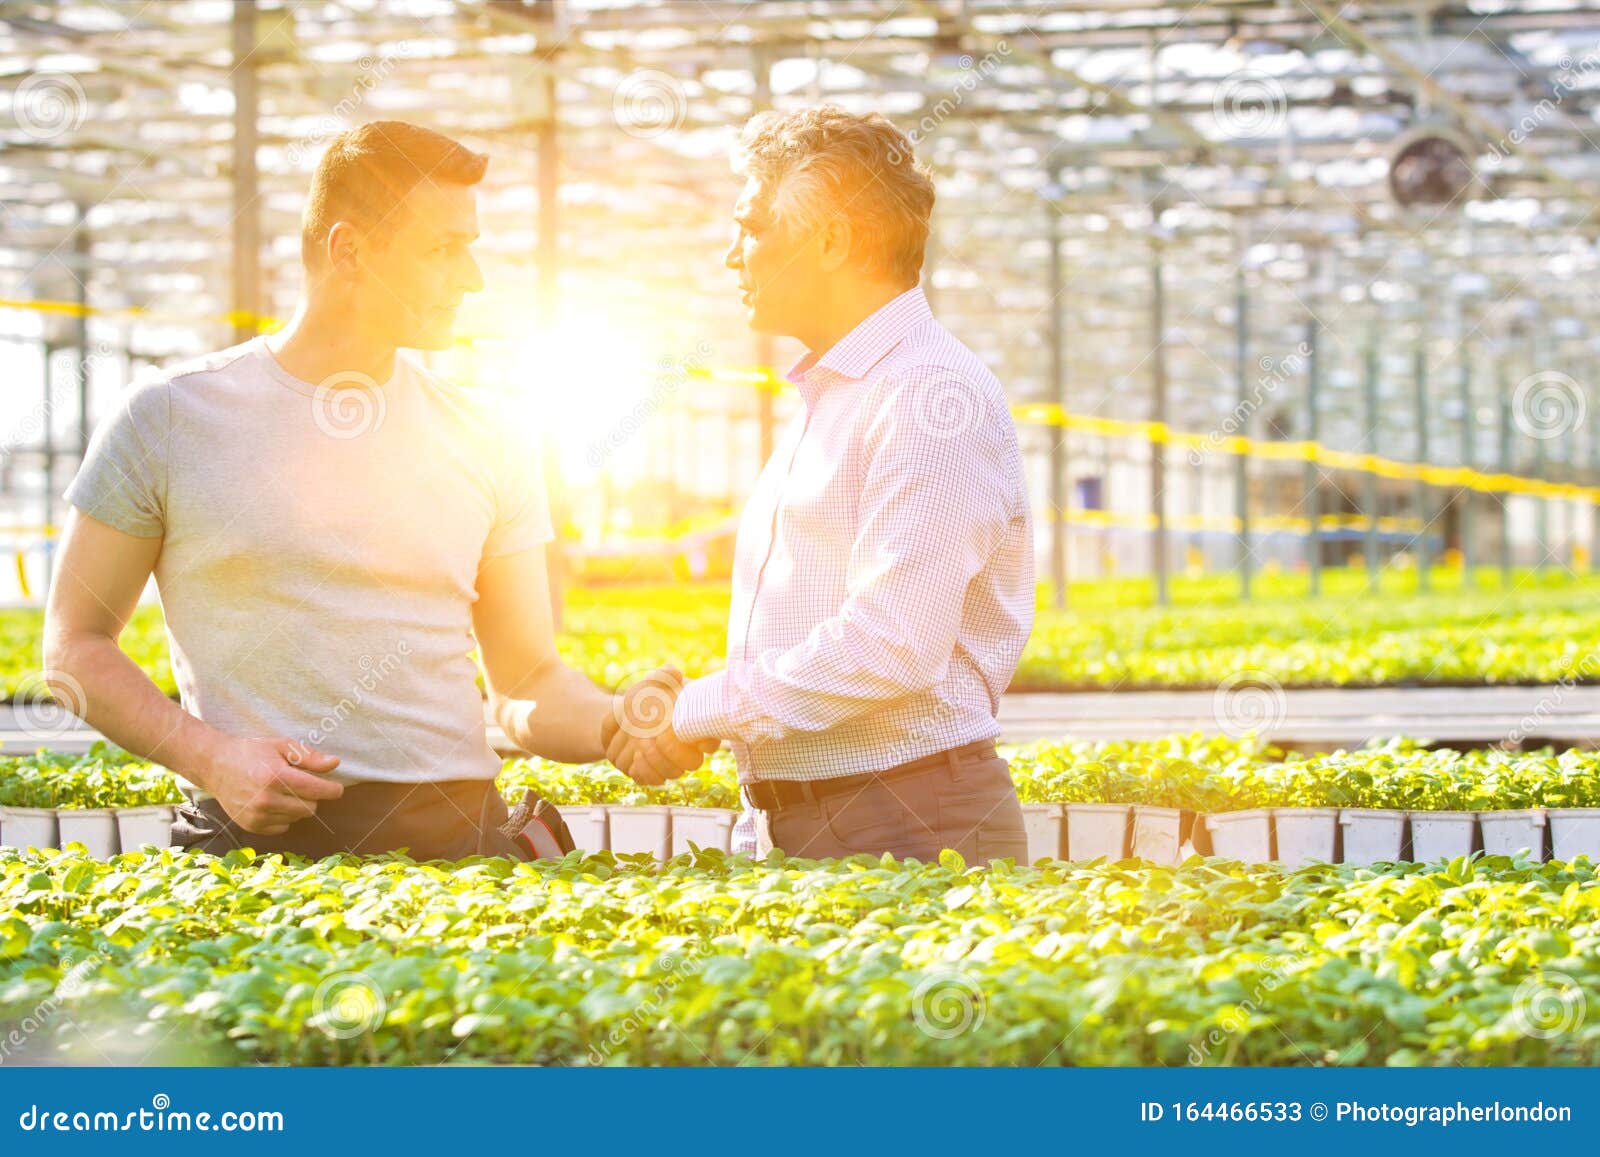 confident businessman shaking hands with male botanist in greenhouse